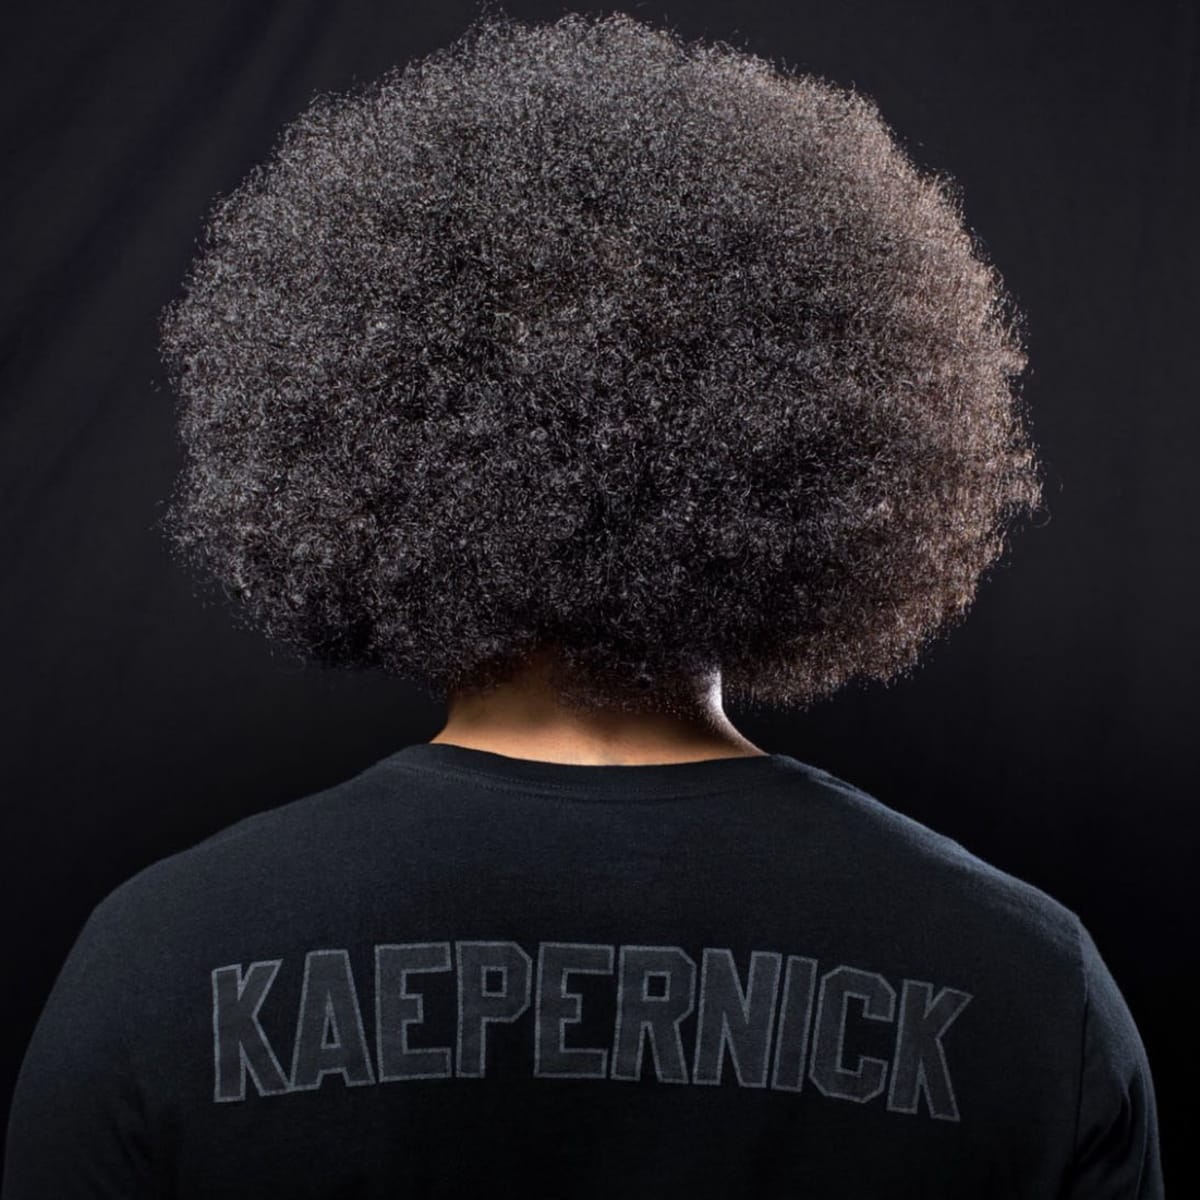 Colin Kaepernick Nike shirts sell out online hours after release